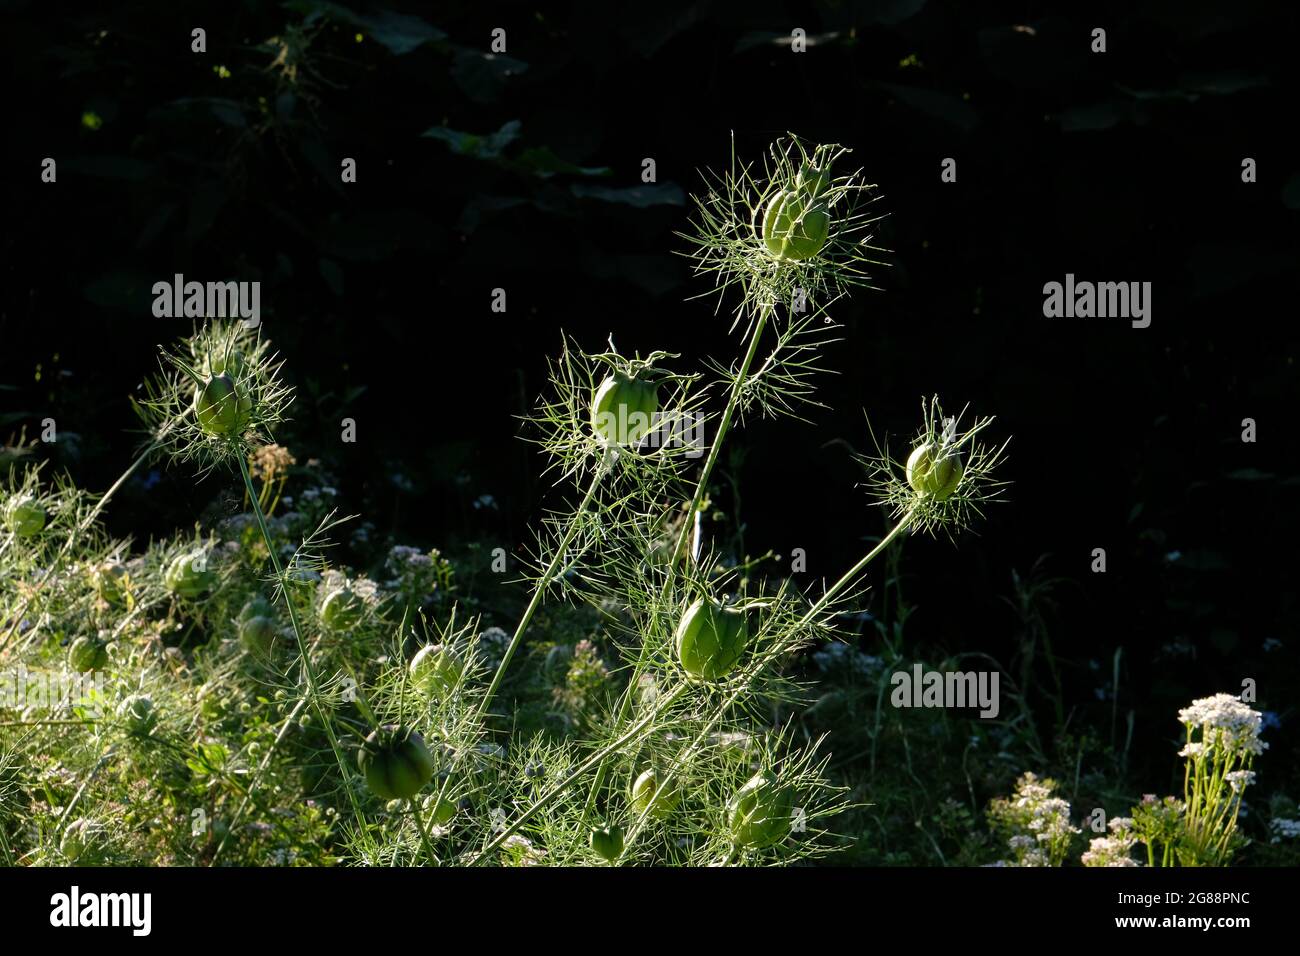 Seed-heads of Love-in-a-mist - Nigella damascena - against a black background Stock Photo